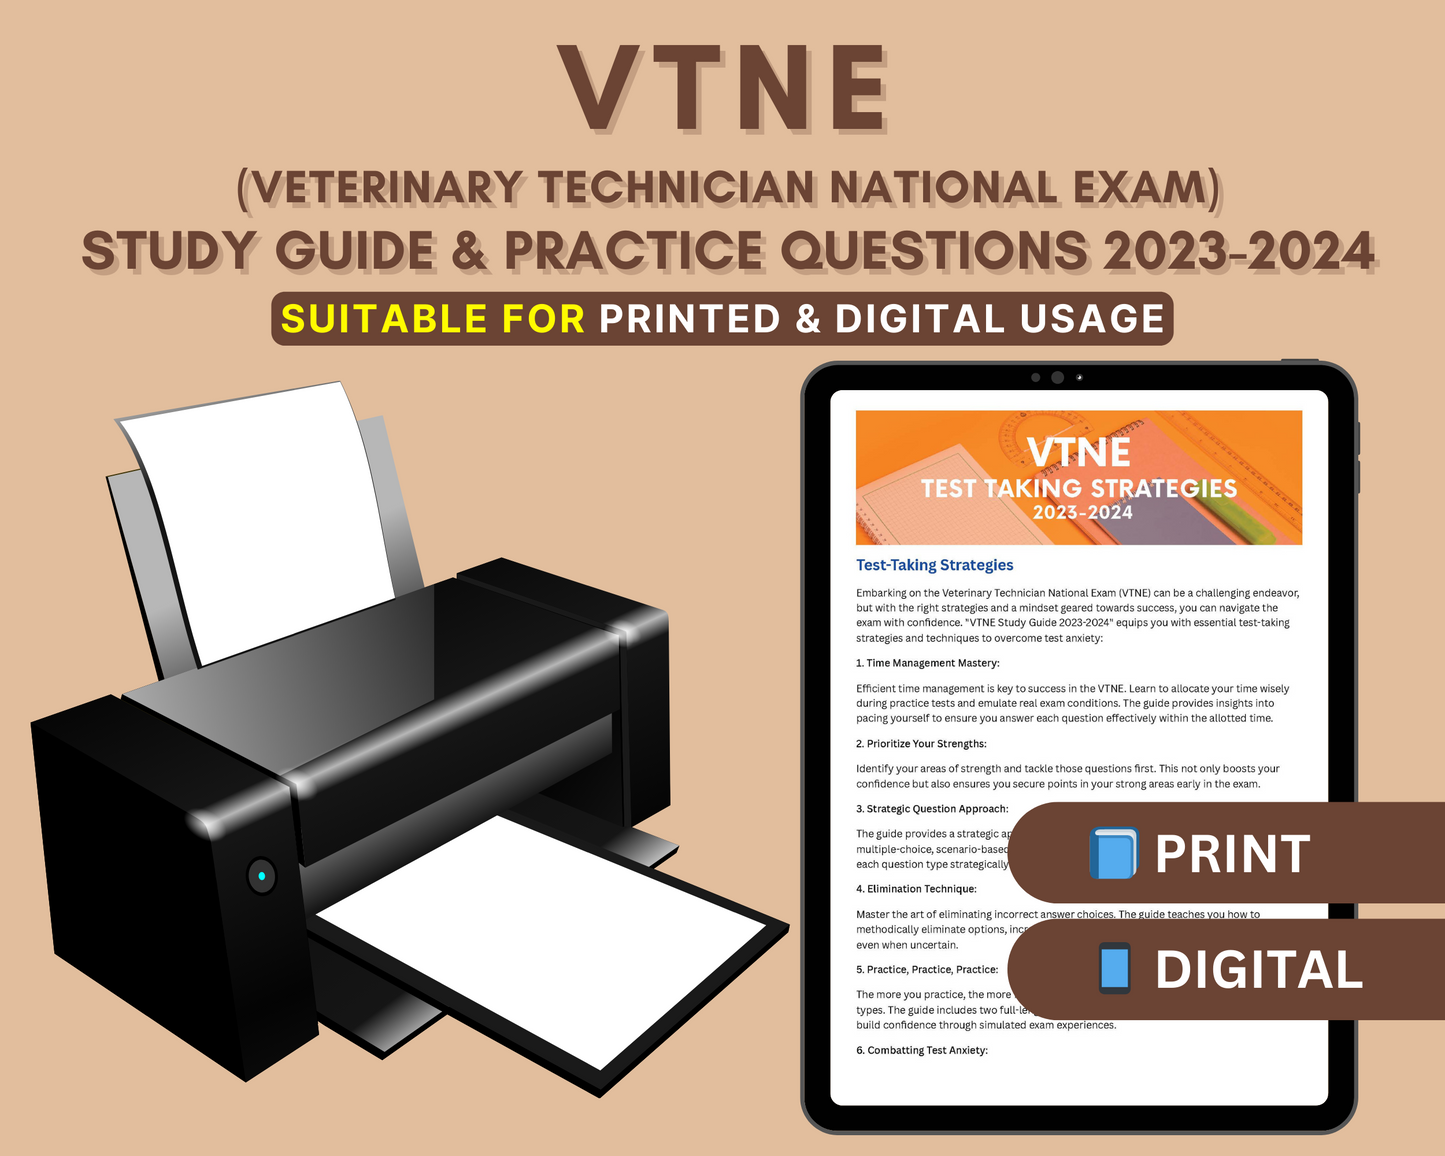 VTNE Exam Study Guide 2023-2024: In-Depth Content Review, and Practice Tests for Veterinary Technician National Exam